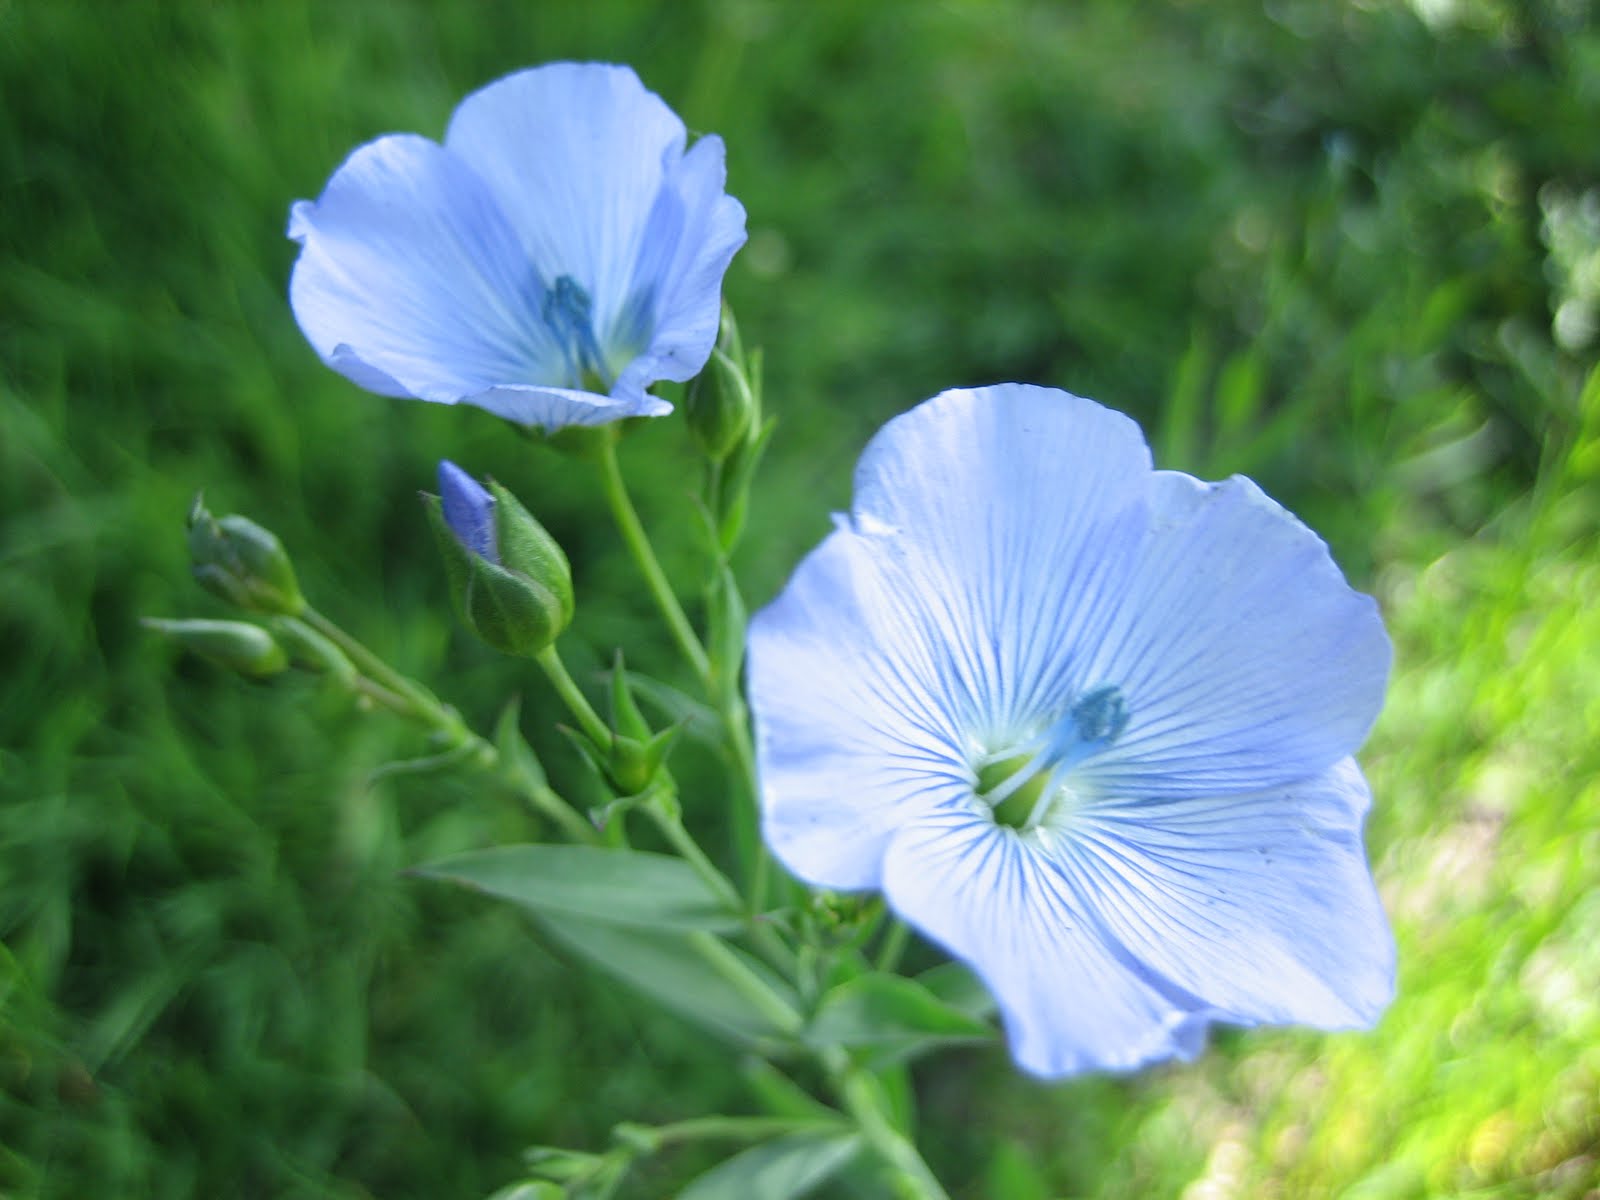 Contemplating Change: Fields of Linseed